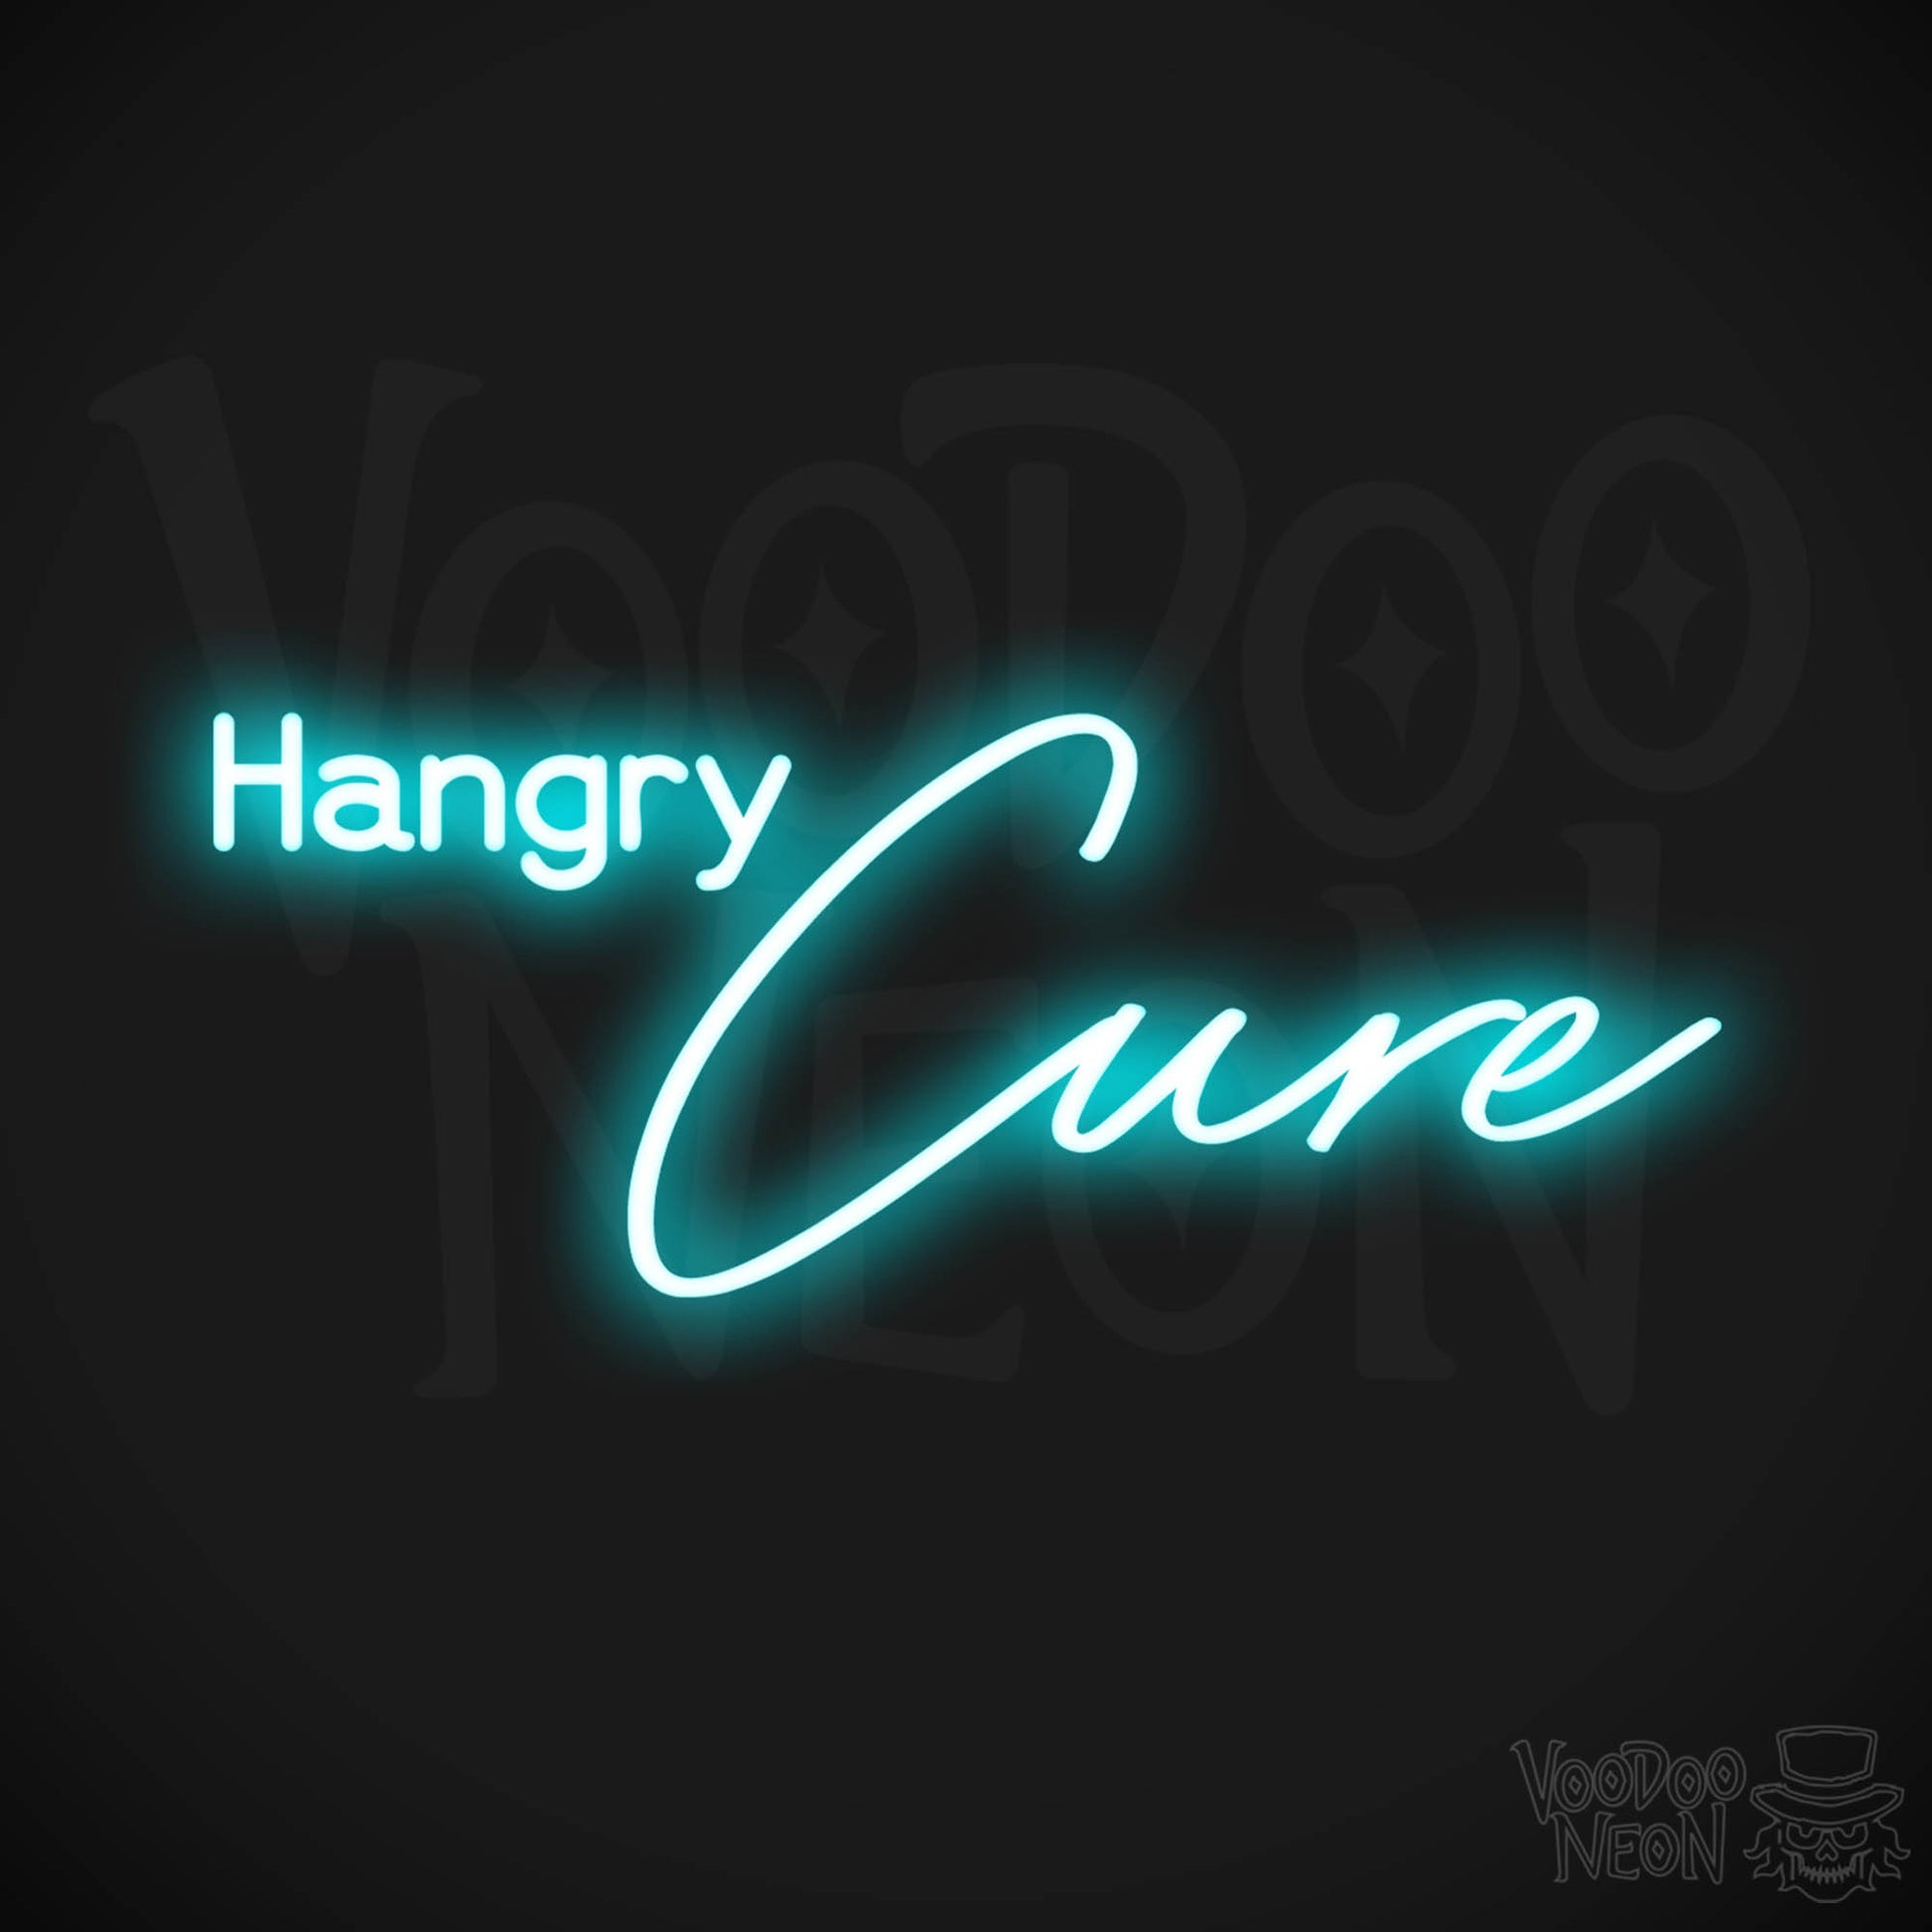 Hangry Cure LED Neon - Ice Blue